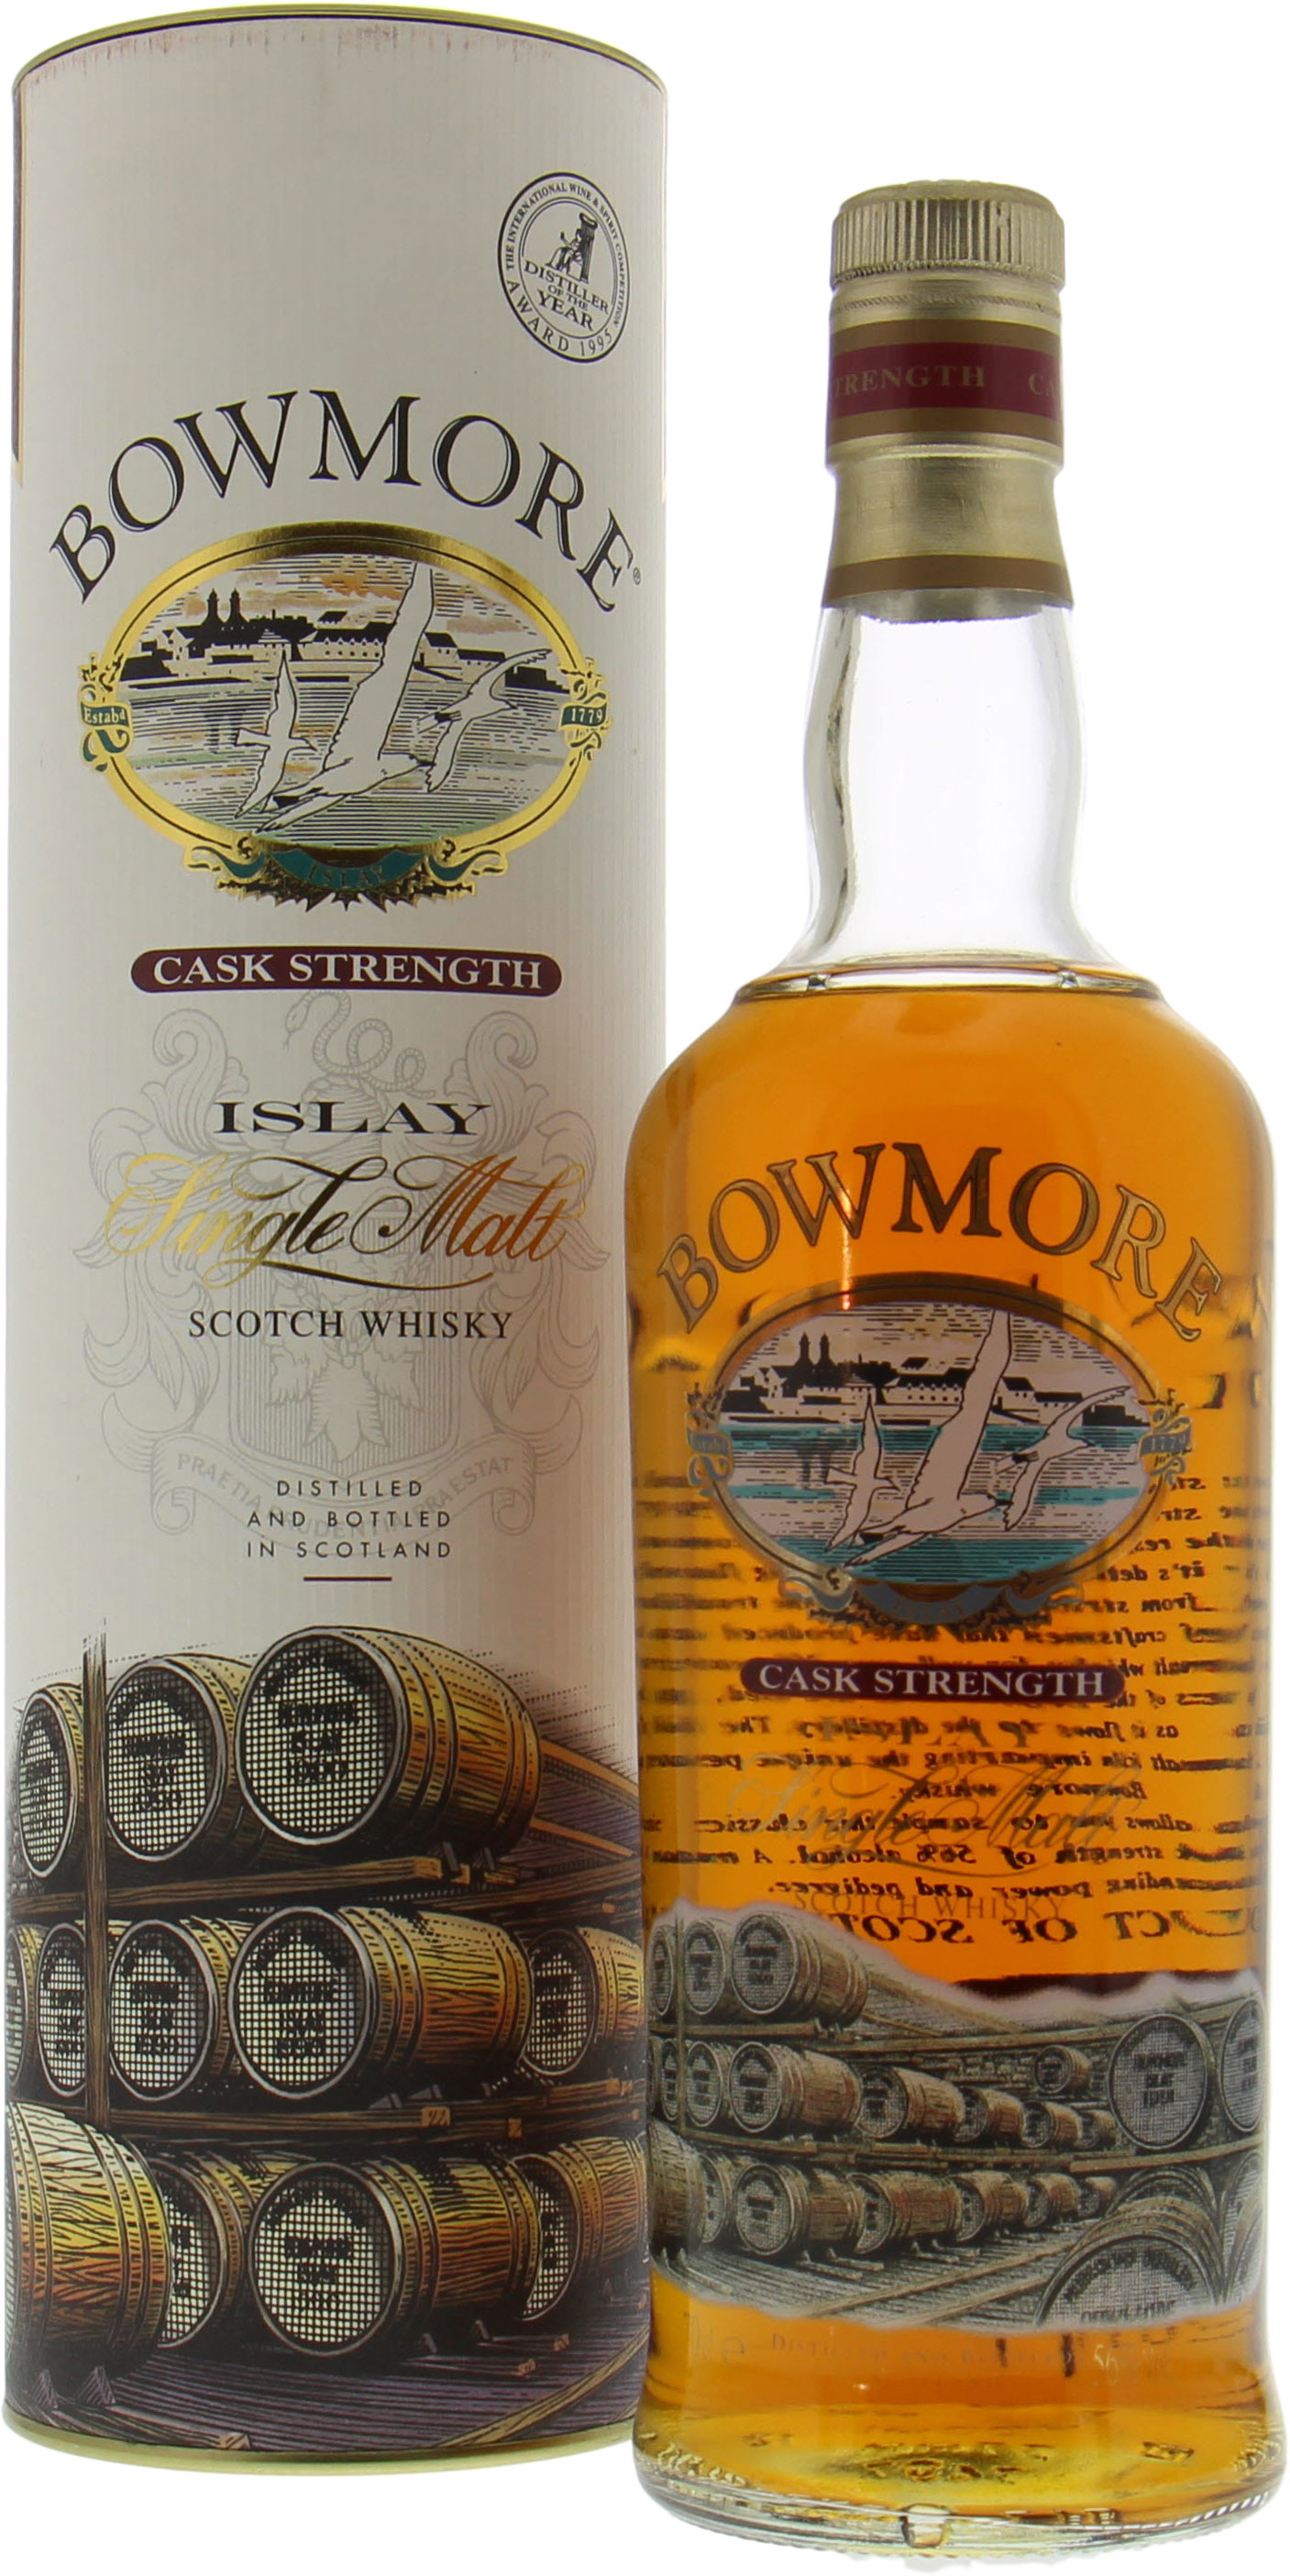 Bowmore - Cask Strength Glass Printed Label red striped capsule 56% NV In Original Container